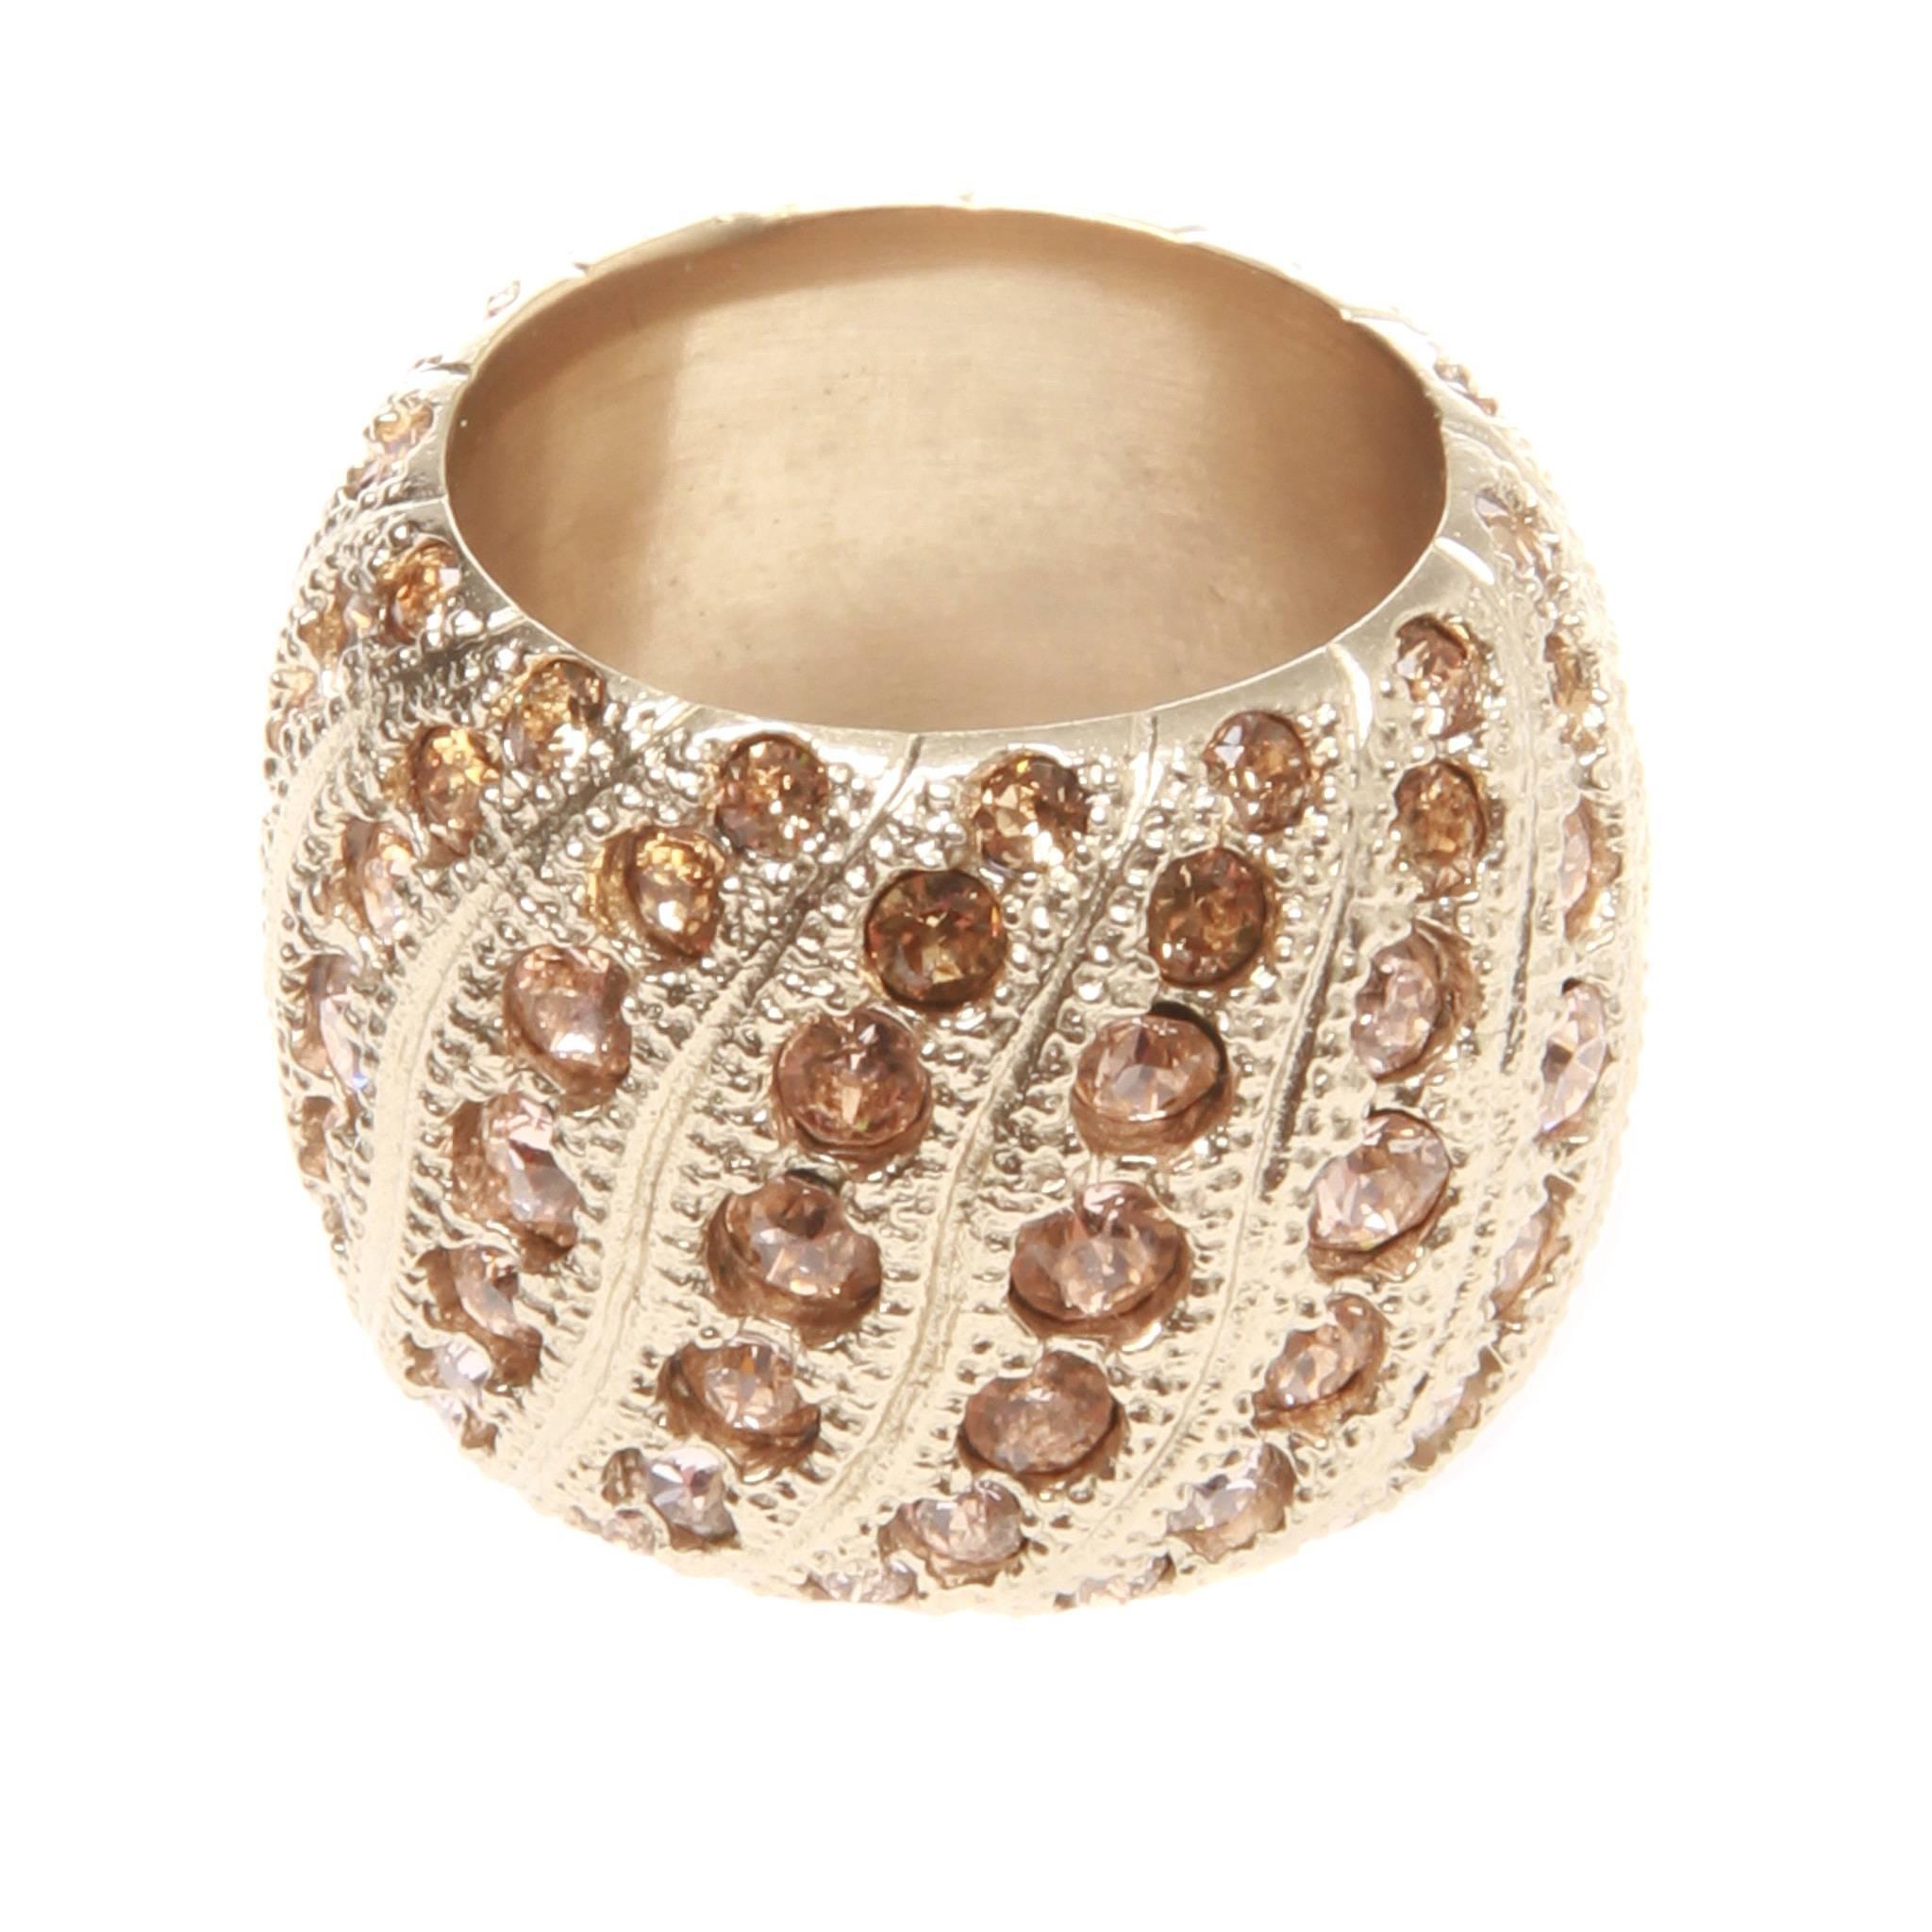 Chanel paved champagne Swarovski crystal gold-tone ring from the Cruise 2016 collection. Beauitful wide-set band with continuous curving lines of bright cut crystals.

Date stamp reads B16 C

Ring Size: 54
US Size: 7
Wide Size: 3/4